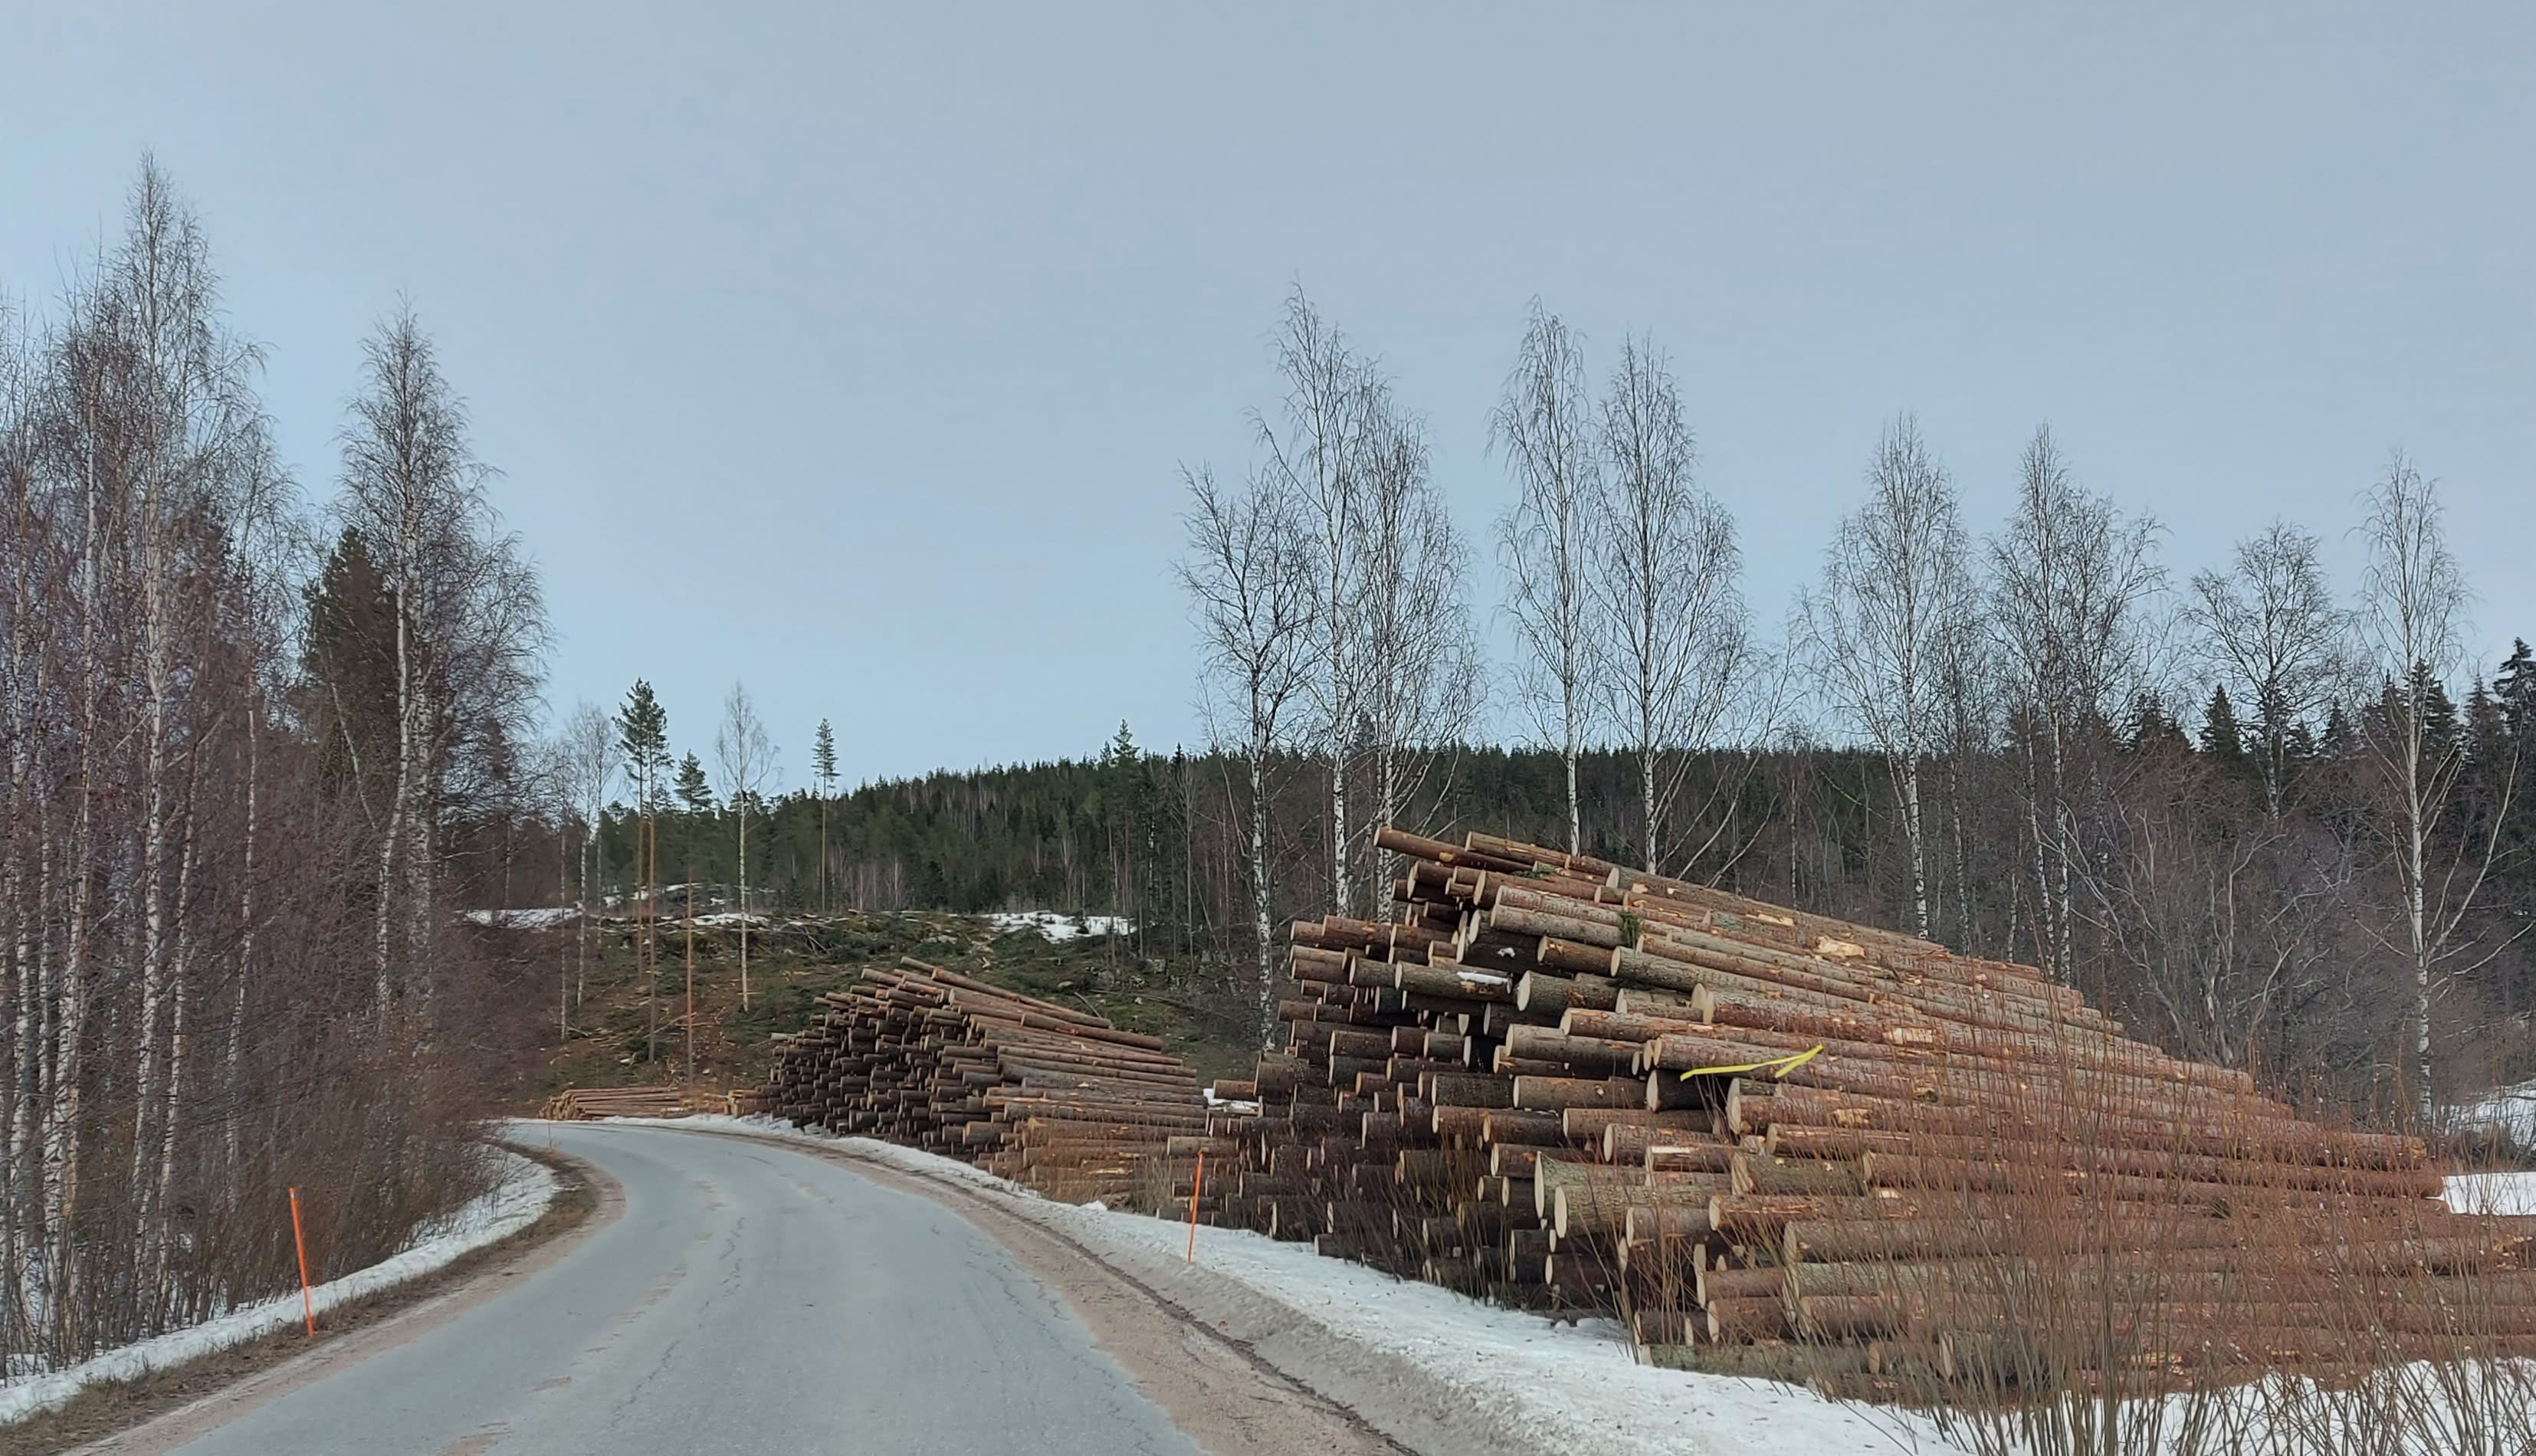 Felling exceeds a sustainable level in southern Finland, says the Natural Resources Center